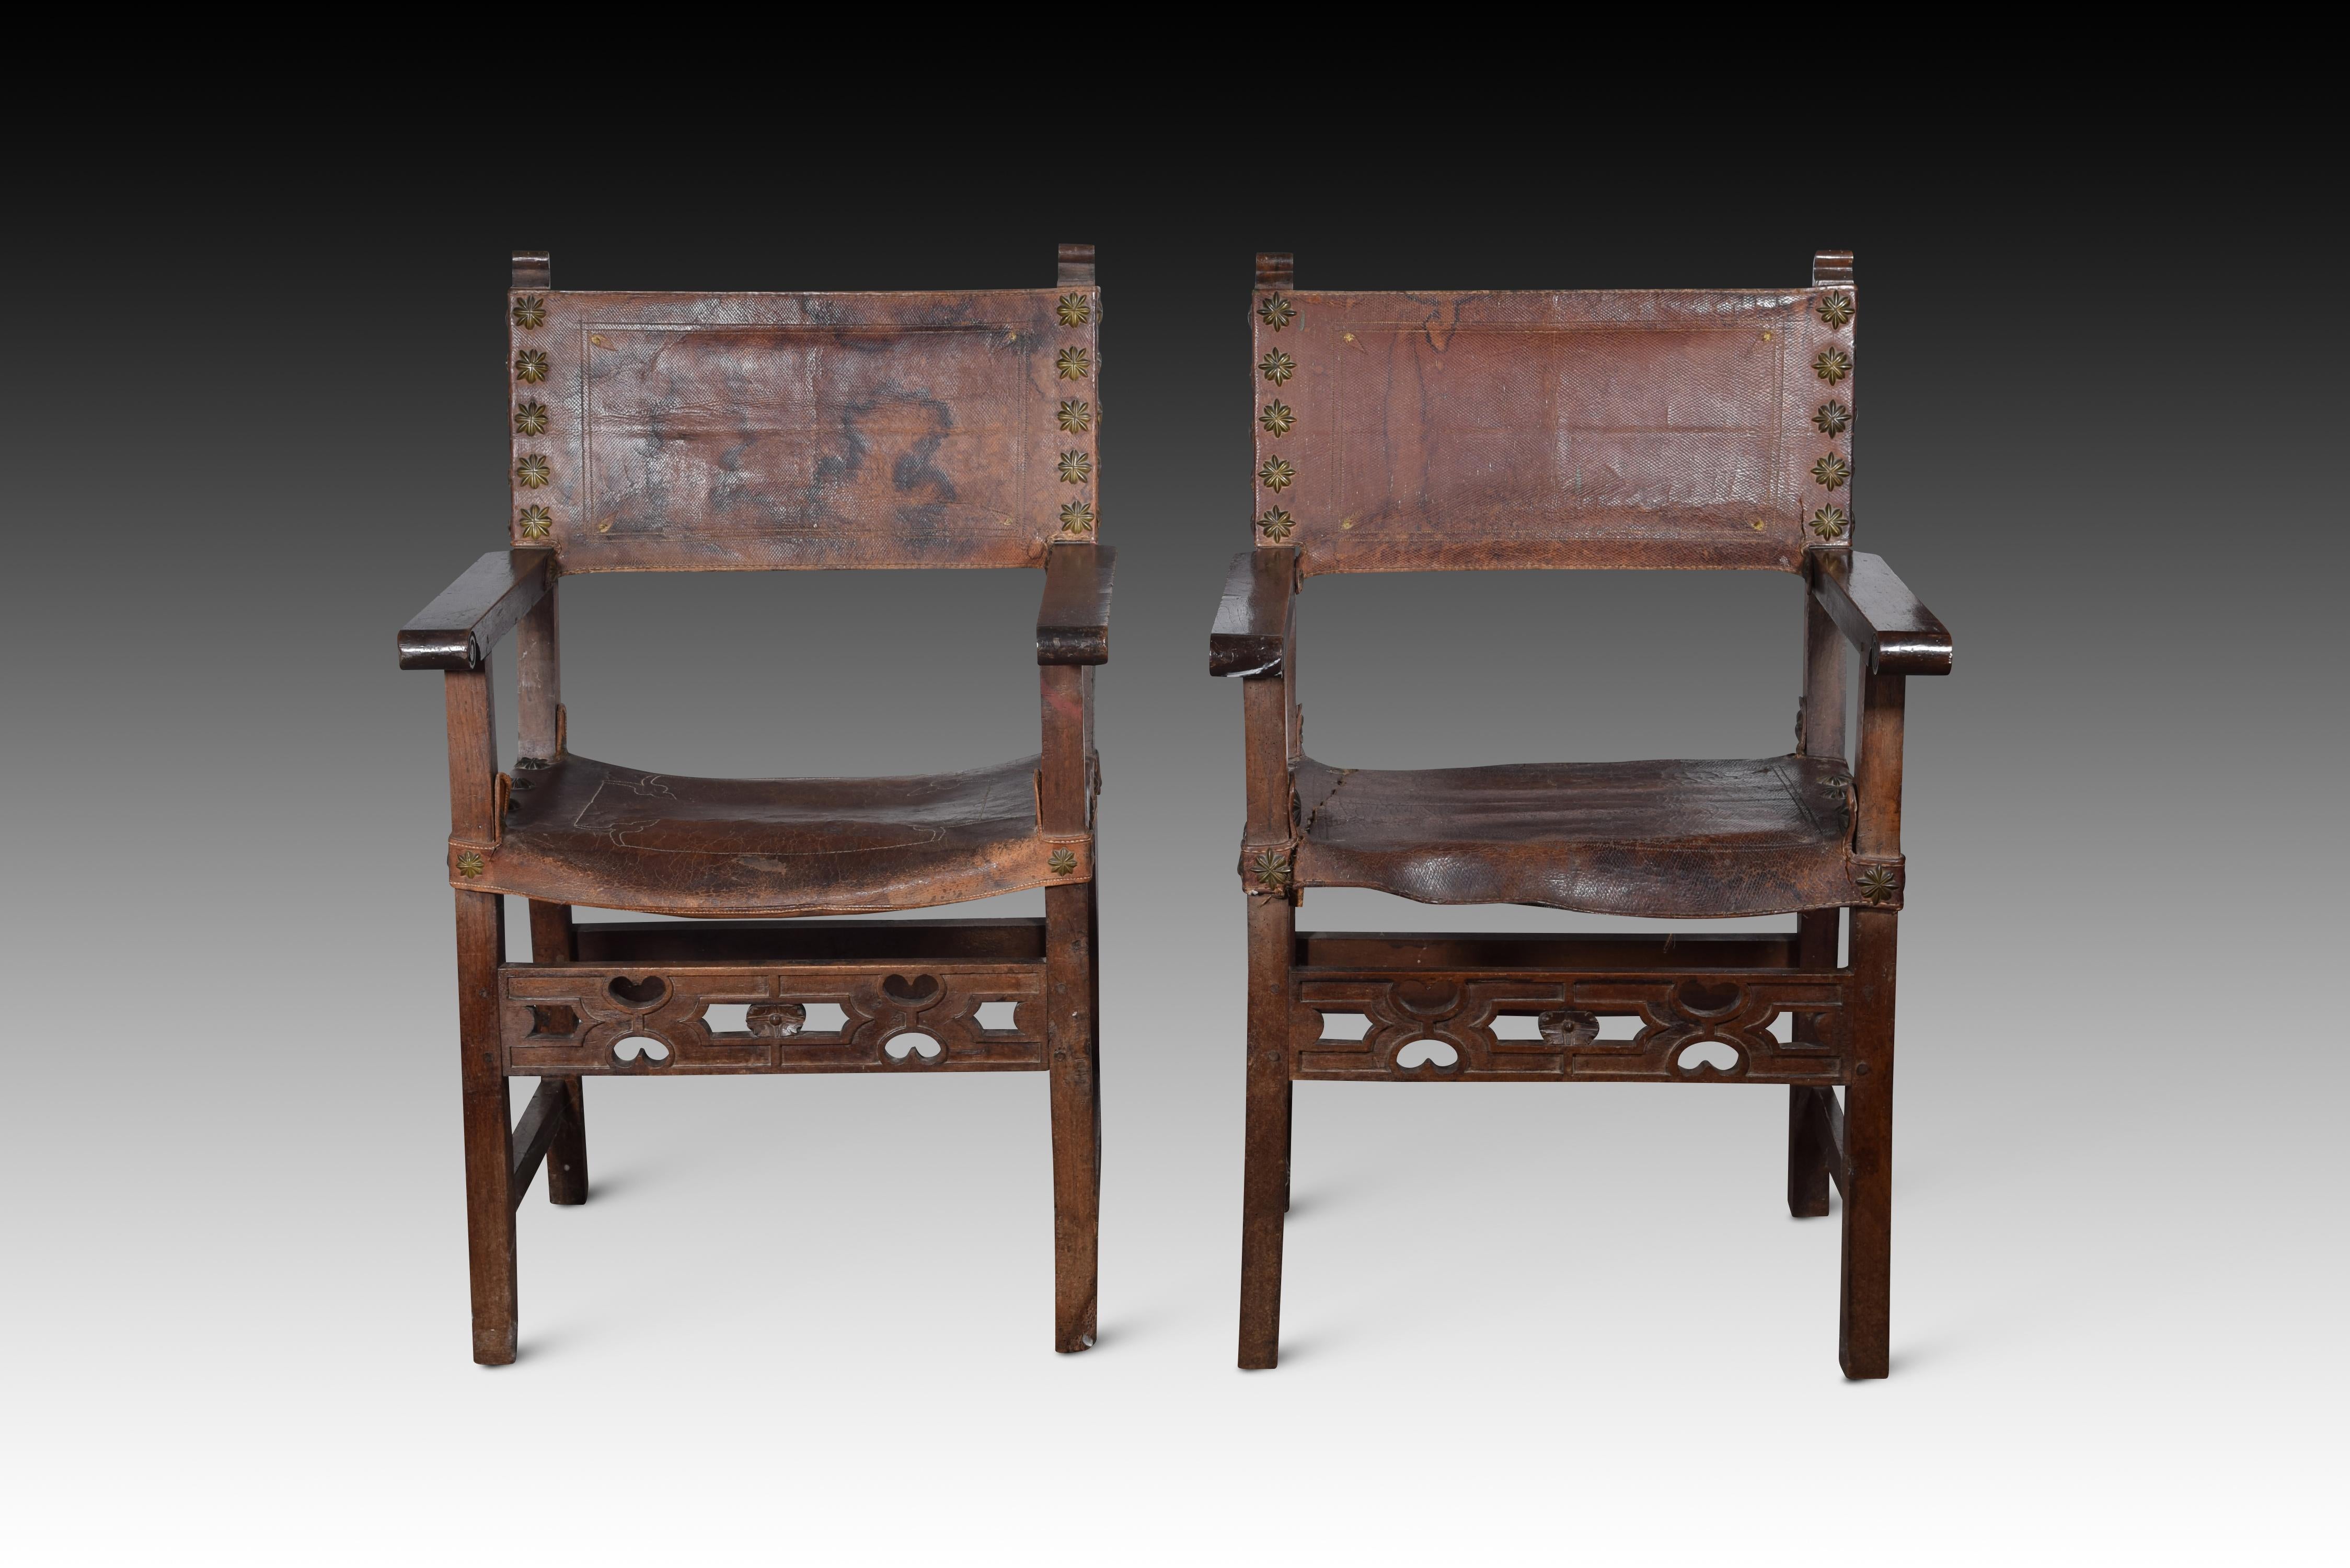 Pair of friar armchairs. Walnut wood, leather, metal. Spain, 17th century. 
Armchairs with arms and high backs of the type known as “frailero”, which have leather with studs on the seat and upper part of the back, low chambranas joining the front